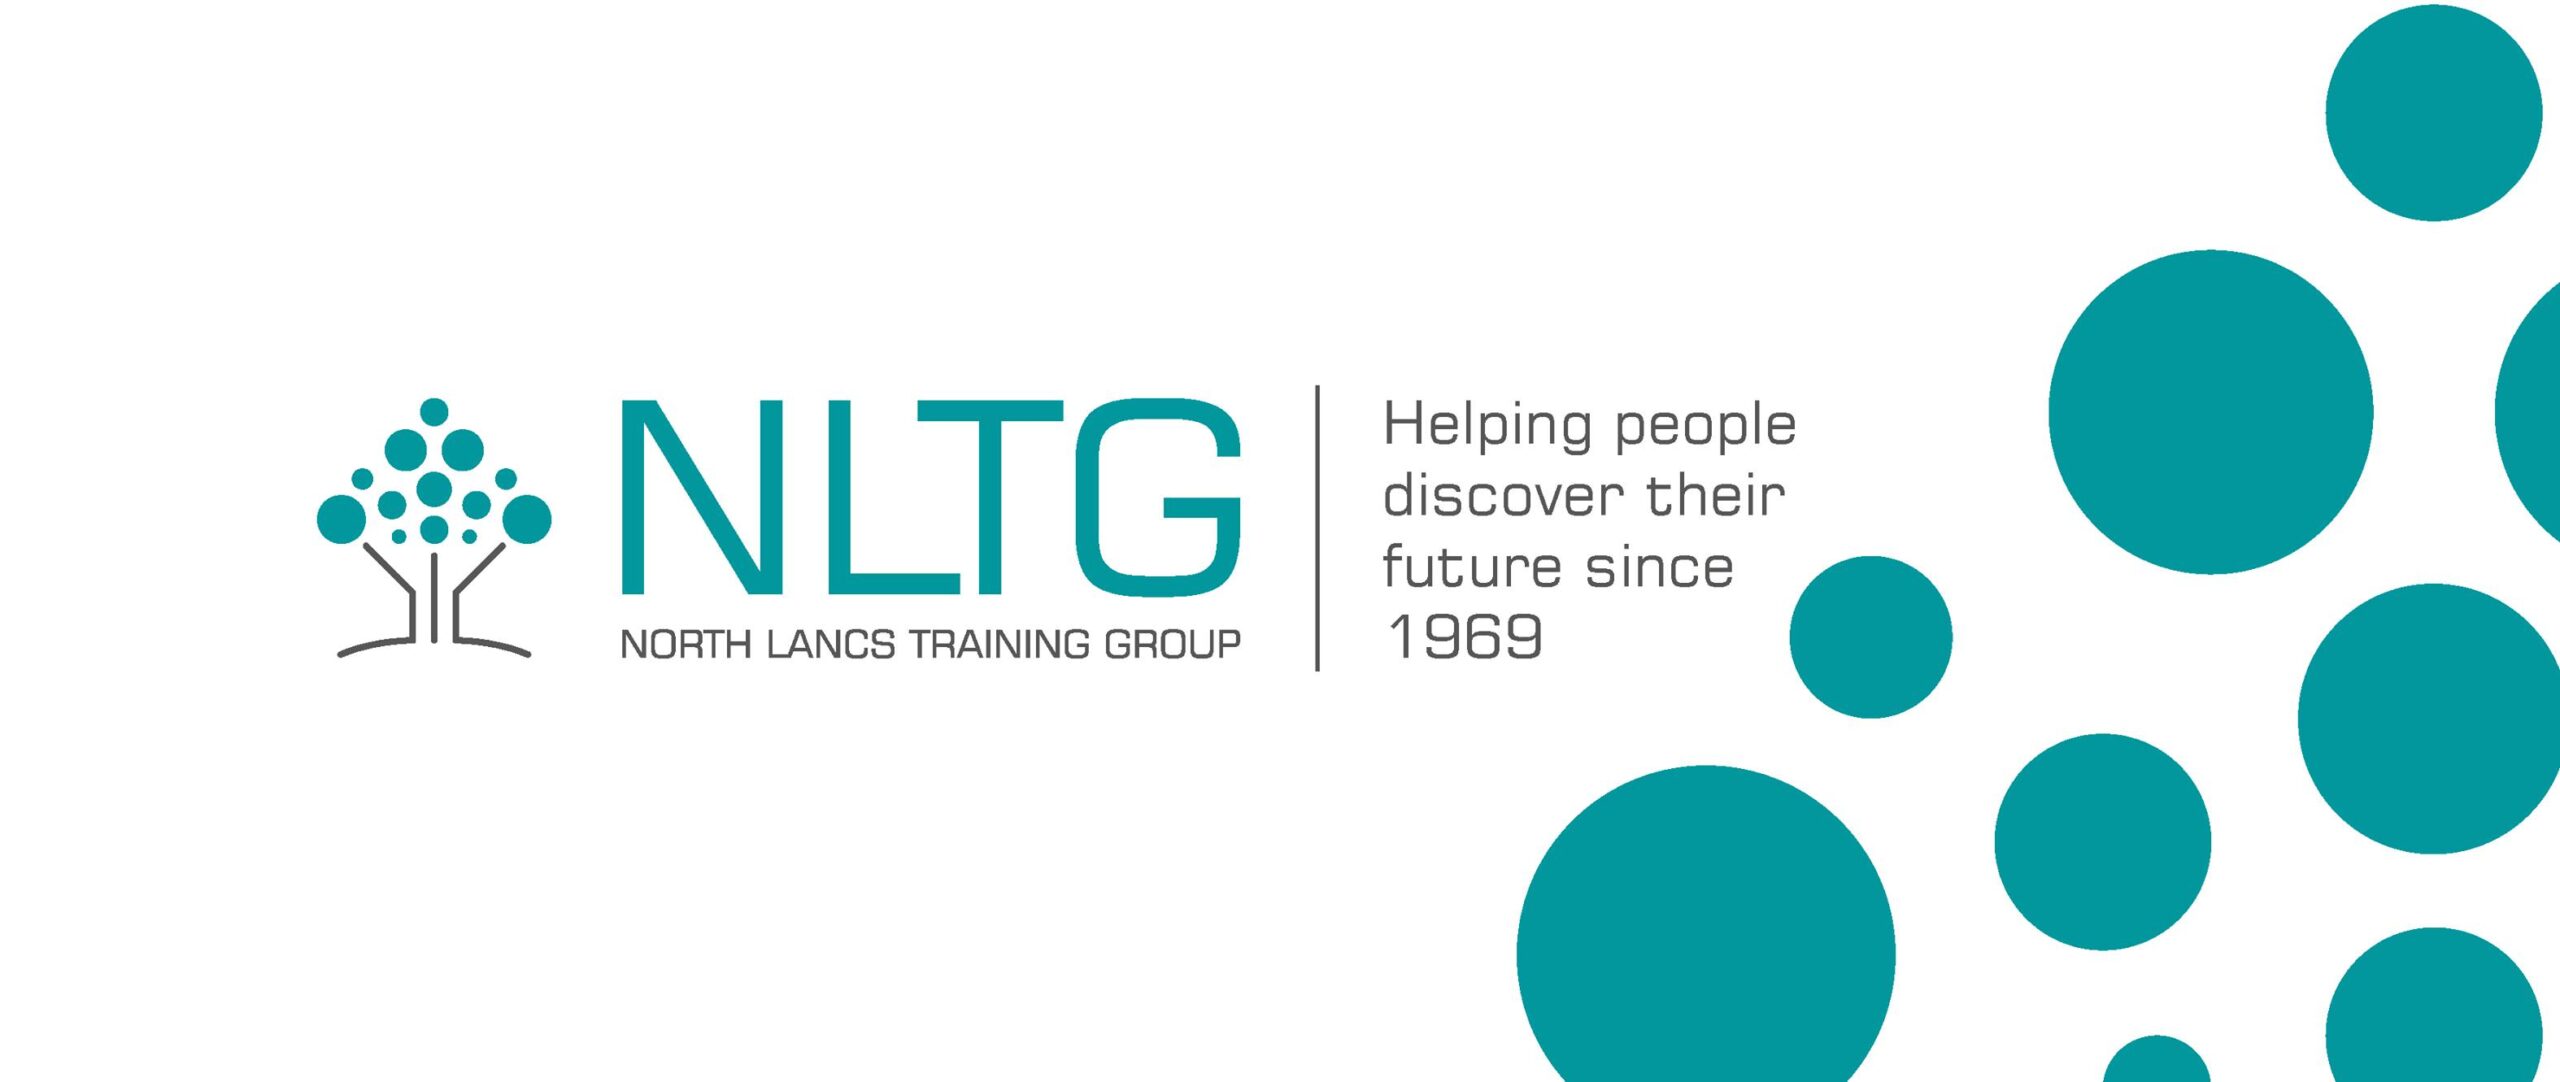 NLTG named training company of the year at the National Fenestration Awards